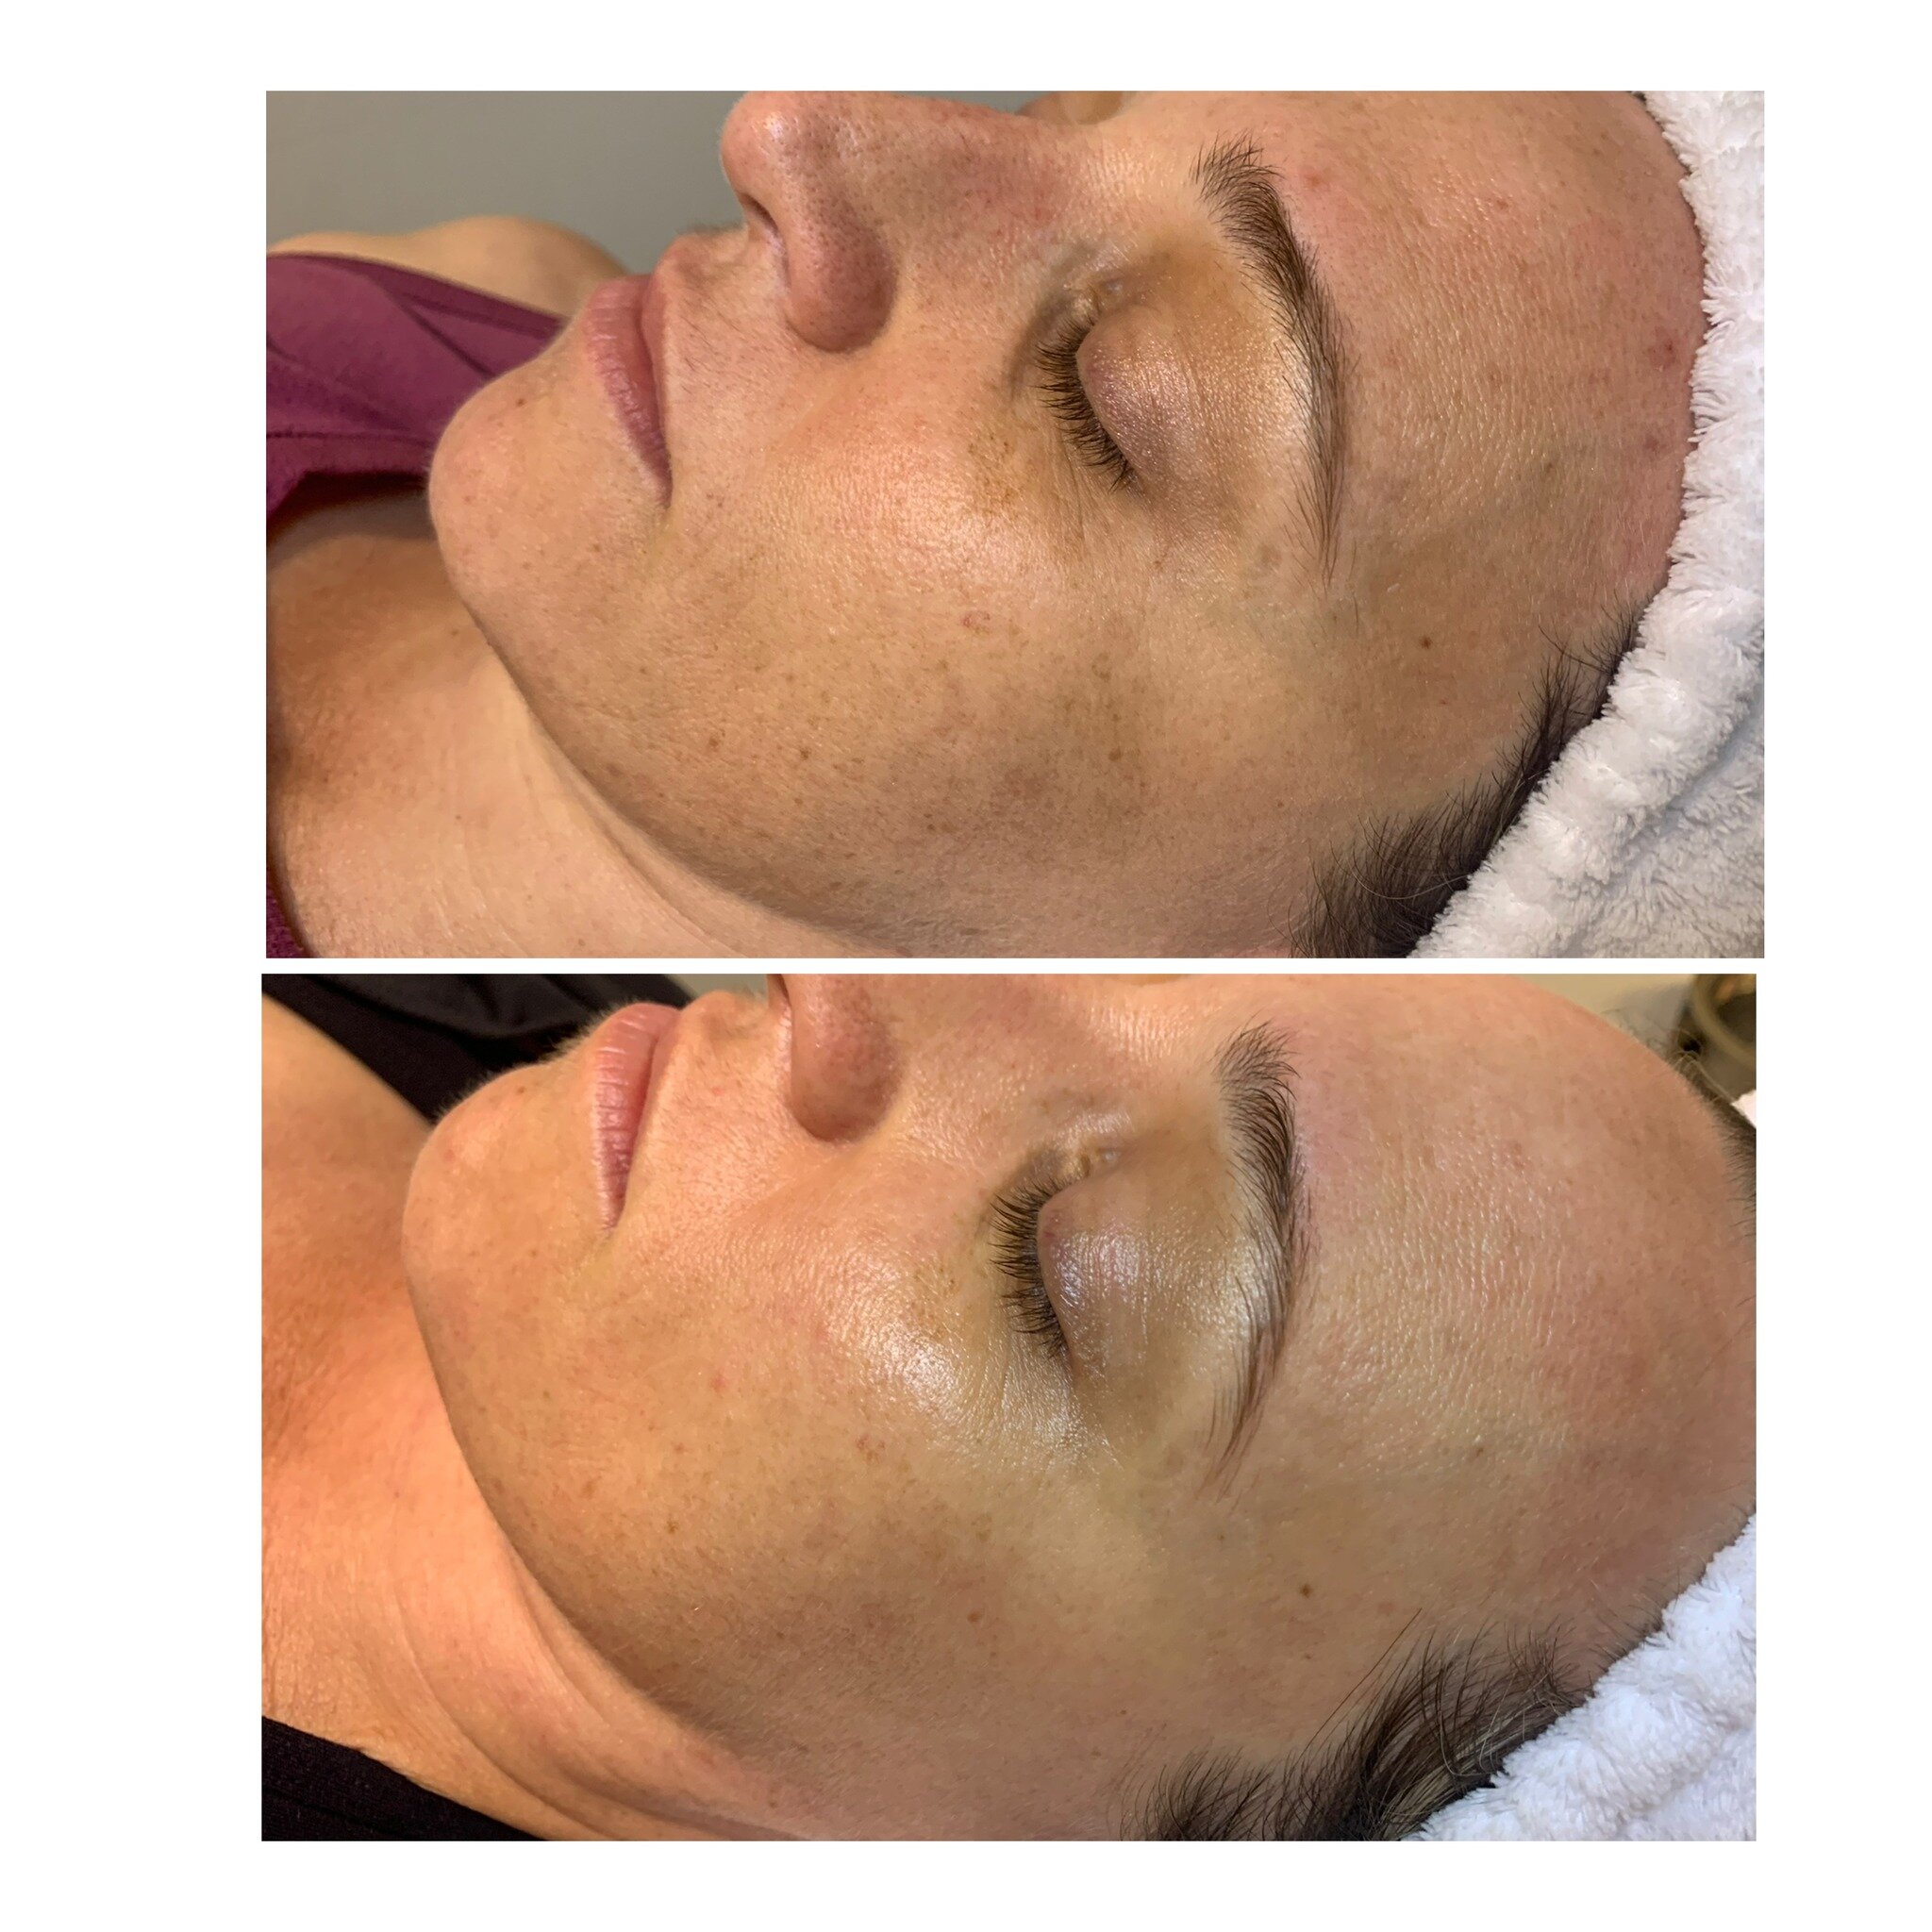 INCREDIBLE results from just 1x Illumi Facial and twice weekly Dermalux LED sessions as well as an IMAGE Skincare at home routine. 🌟

Notice the faded pigmentation on the cheek and forehead as well as all over skin rejuvenation!

IMAGE Skincare at h